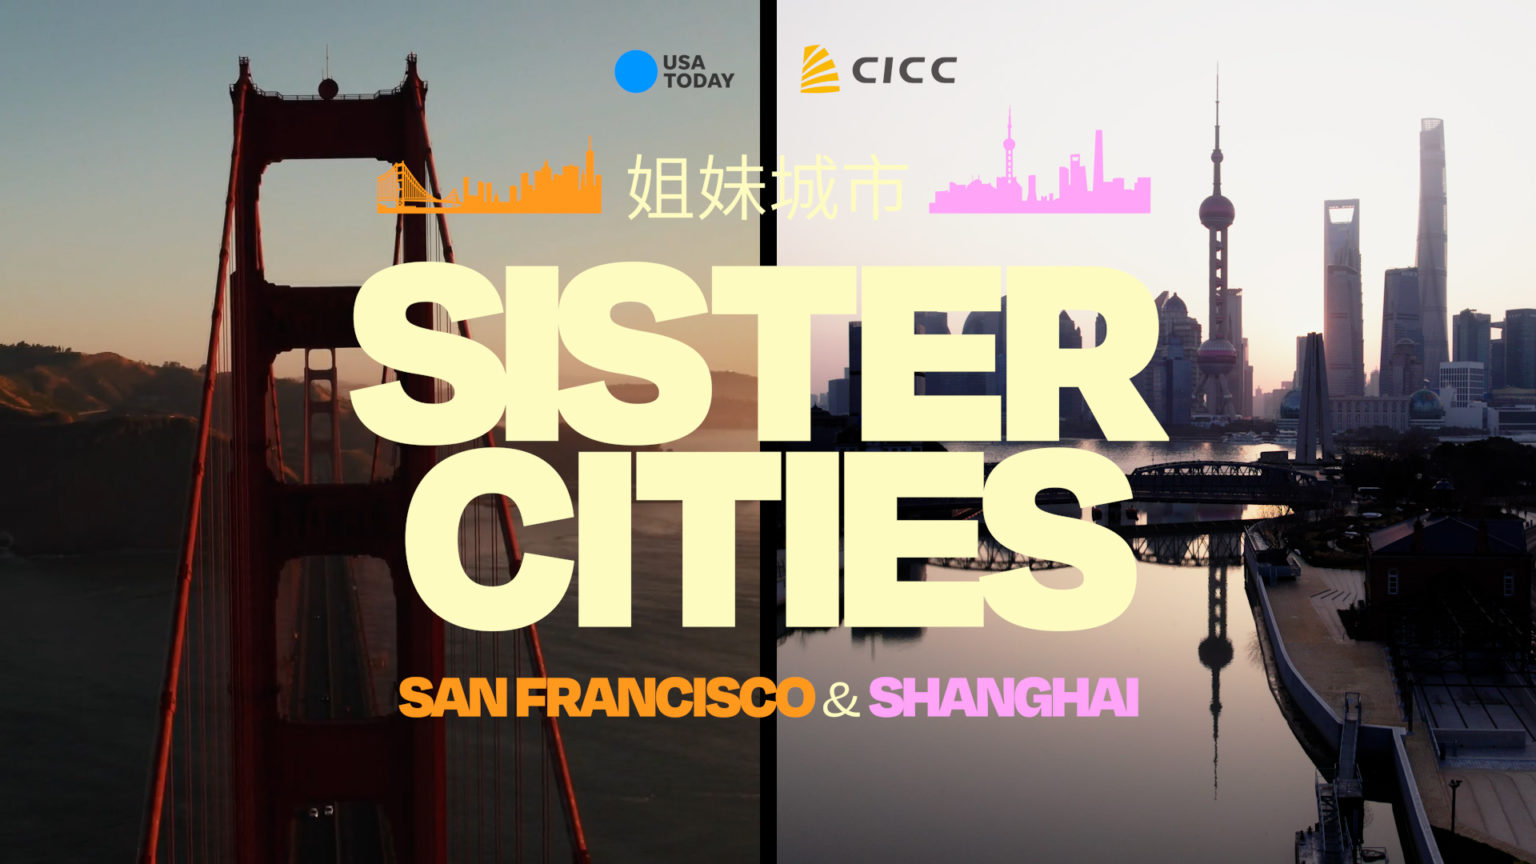 USA TODAY and China Intercontinental Communication Center Launch Sister Cities TV Series